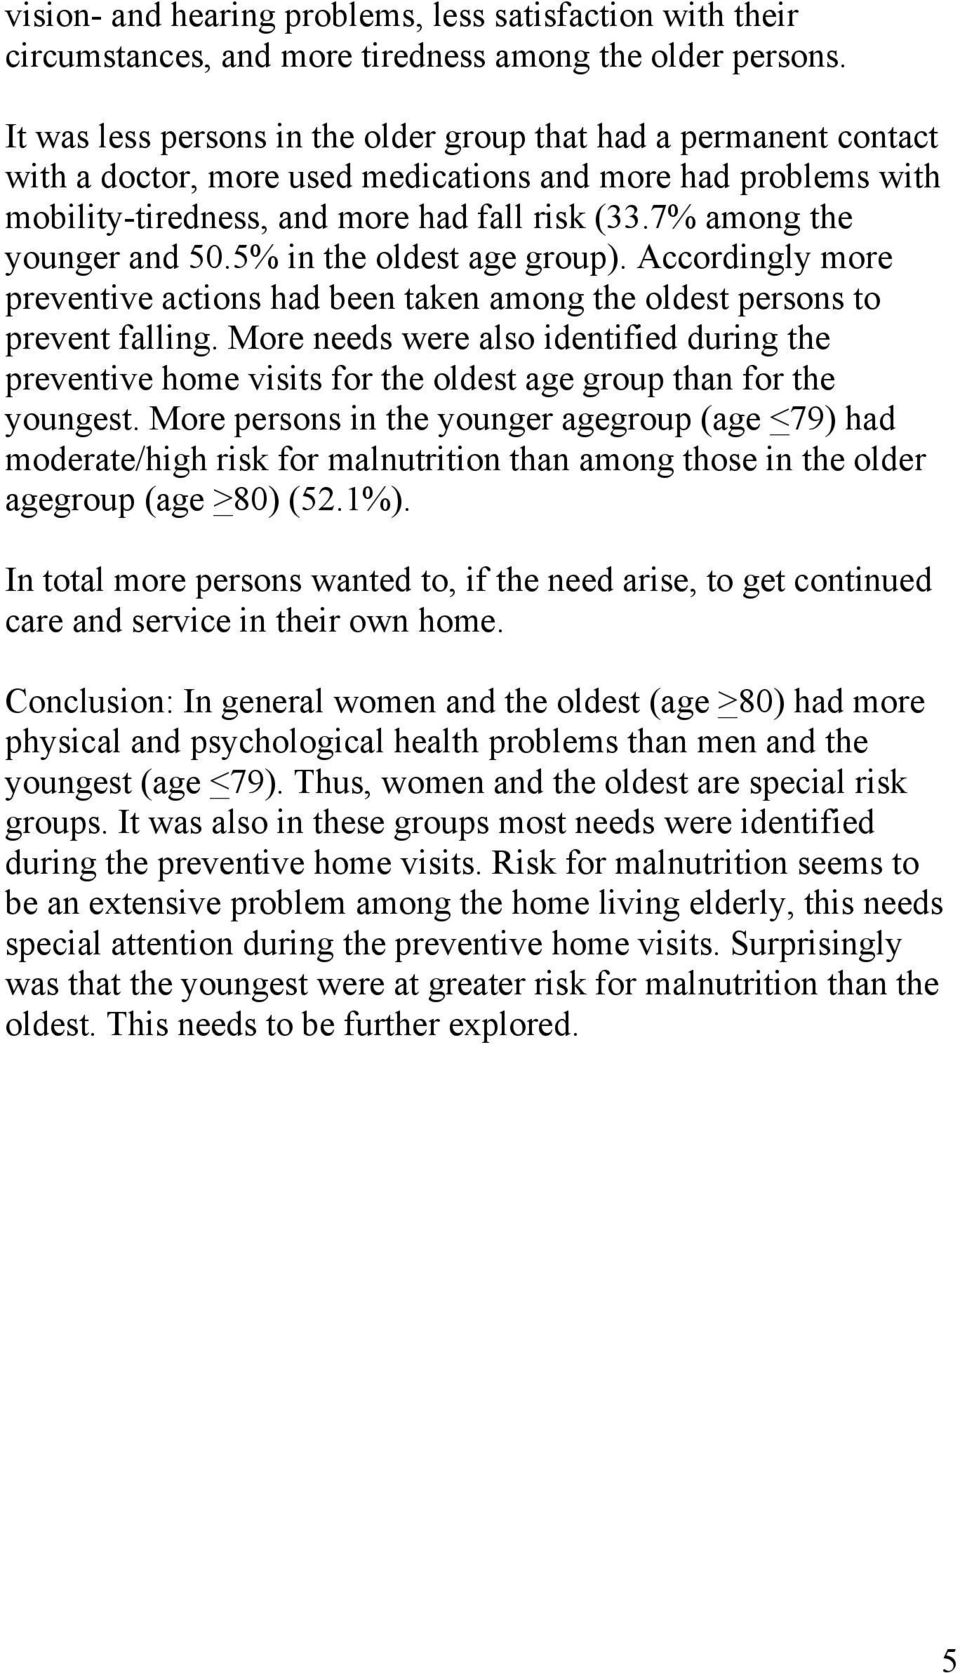 7 among the younger and 50.5 in the oldest age group). Accordingly more preventive actions had been taken among the oldest persons to prevent falling.